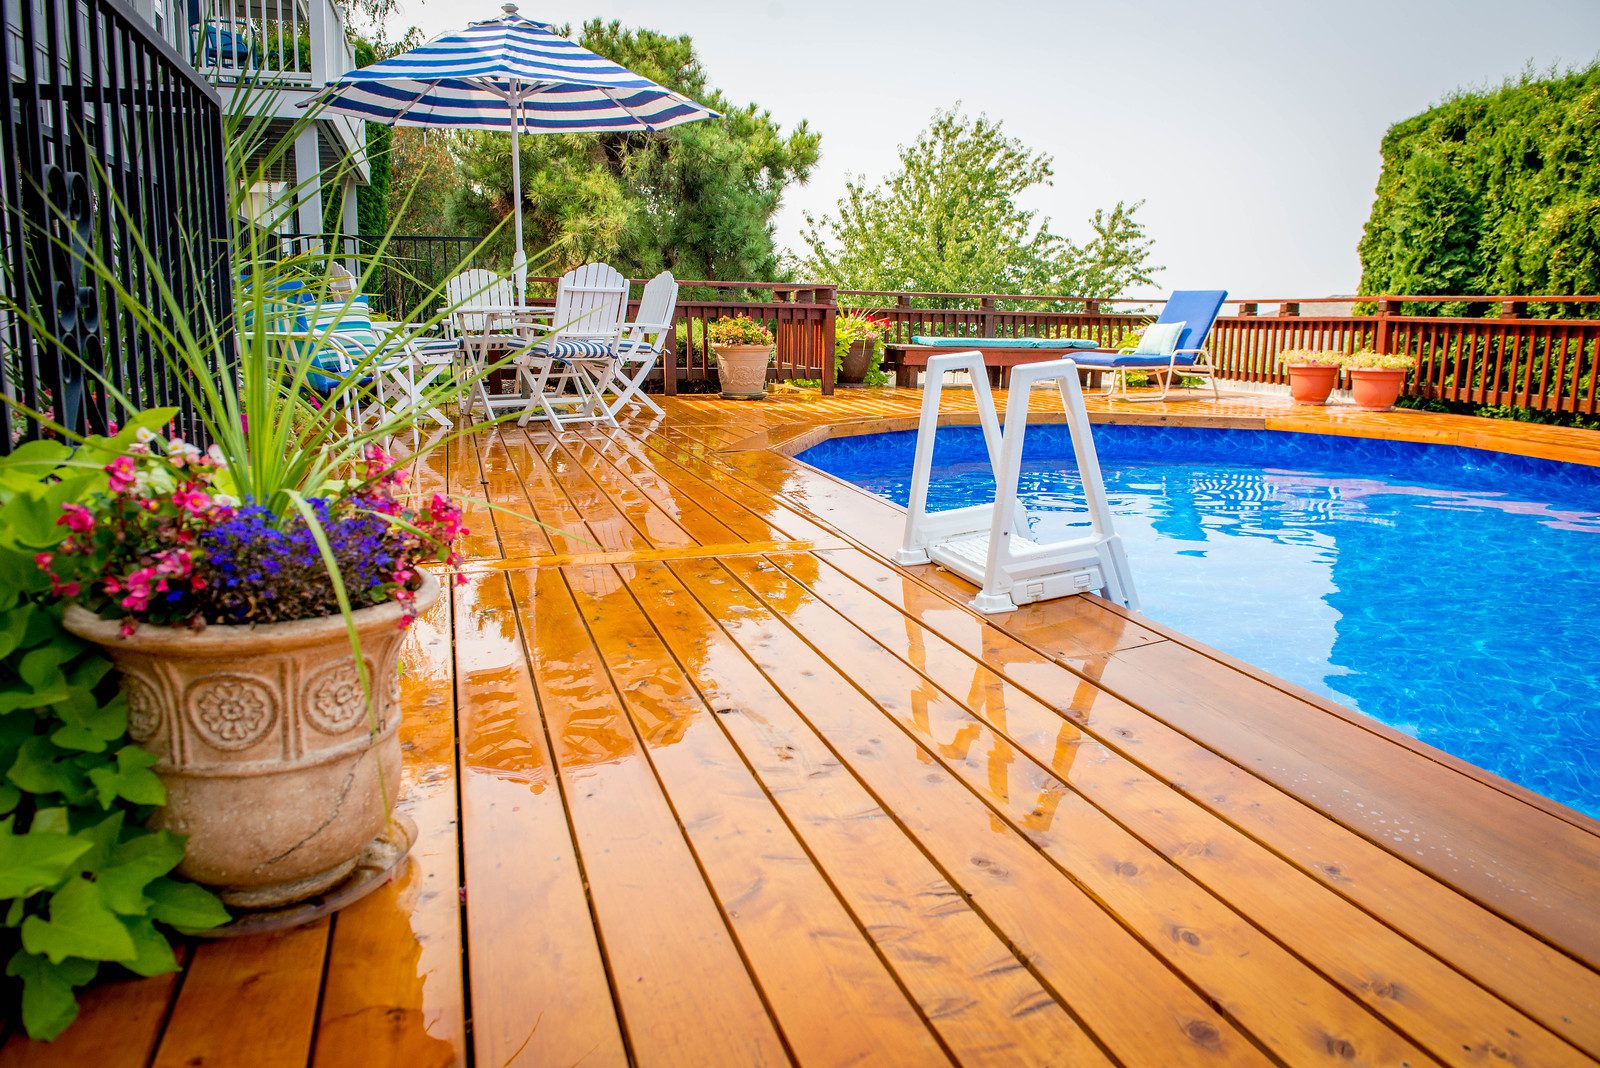 Stained Port Orford Cedar Deck